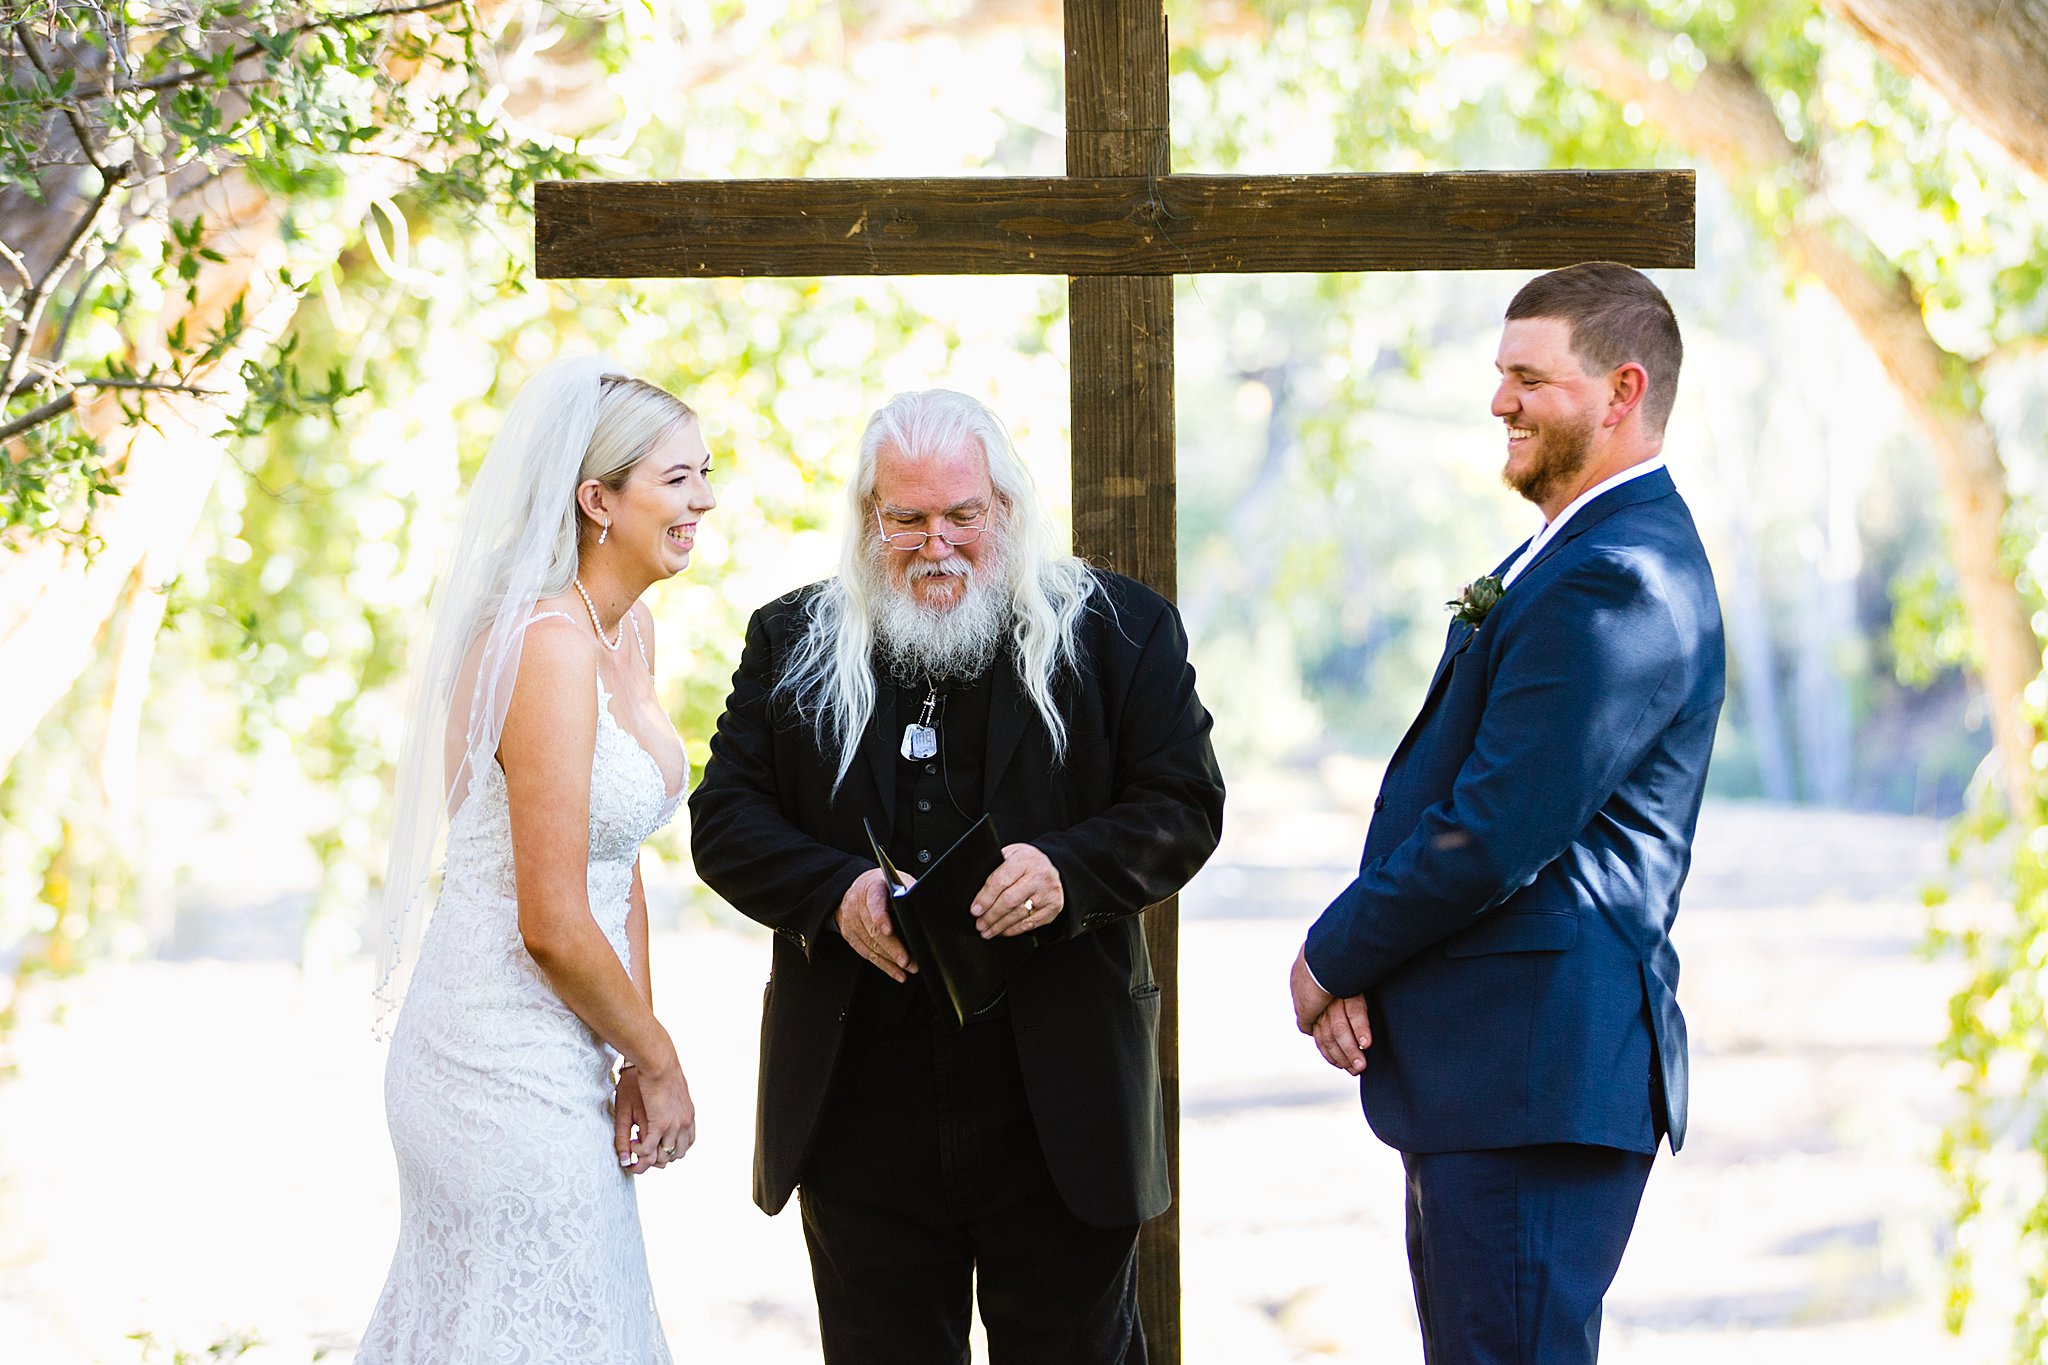 Bride and Groom laughing together during Van Dickson Ranch wedding ceremony by Skull Valley wedding photographer PMA Photography.